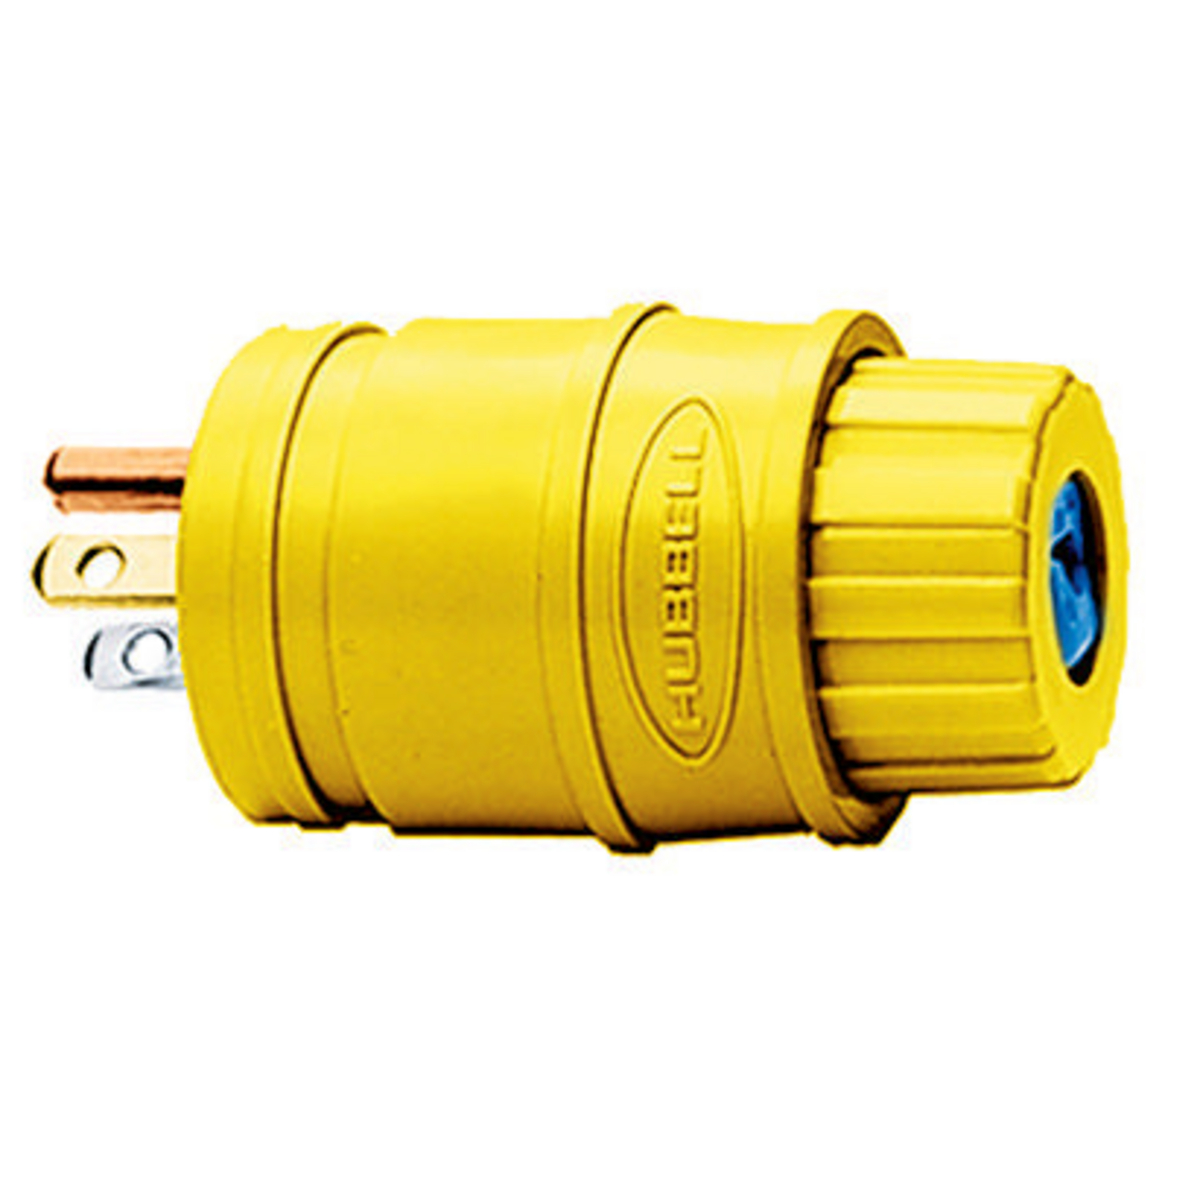 Hubbell HBL14W47 Watertight Connector Plug 10 Each for sale online 